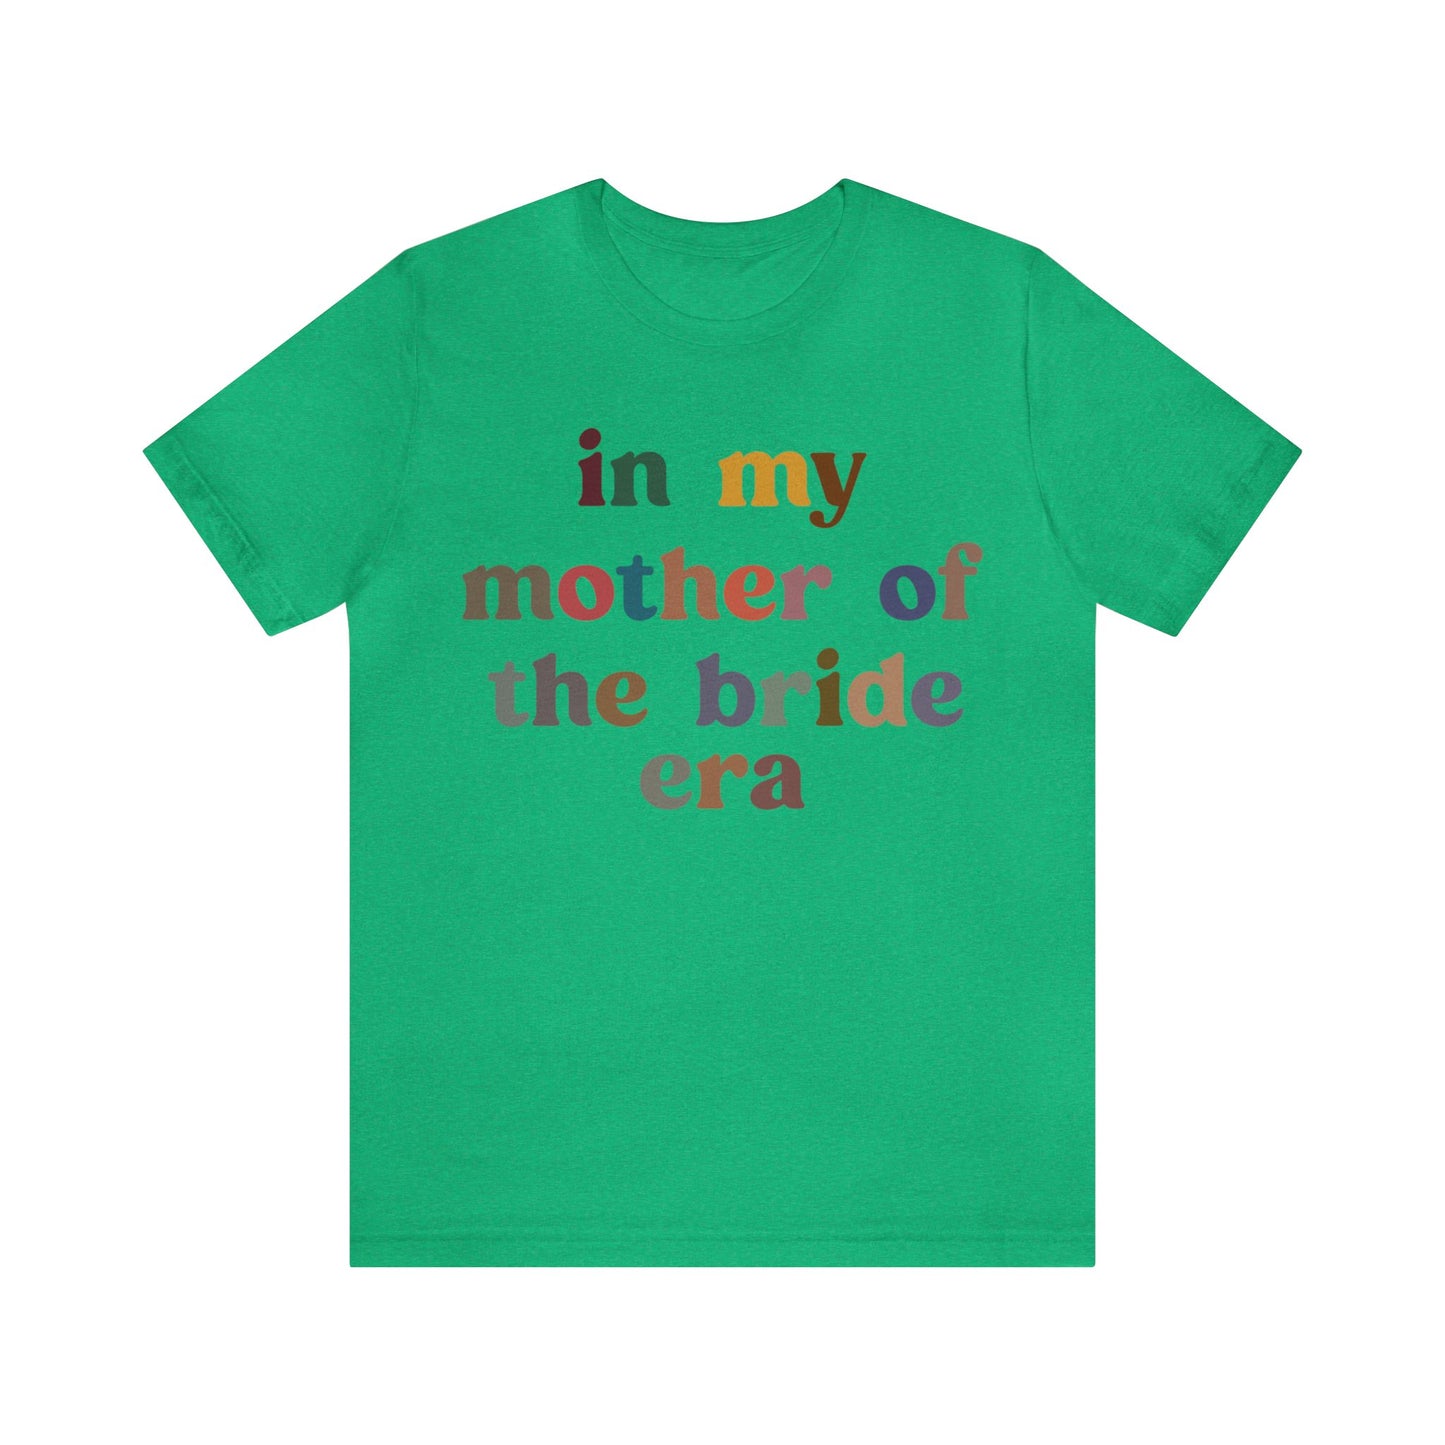 In My Mother of the Bride Era Shirt, Bridal Party Shirt for Mom, Retro Wedding Shirt for Mom, Engagement Shirt, Cute Wedding Gift, T1350